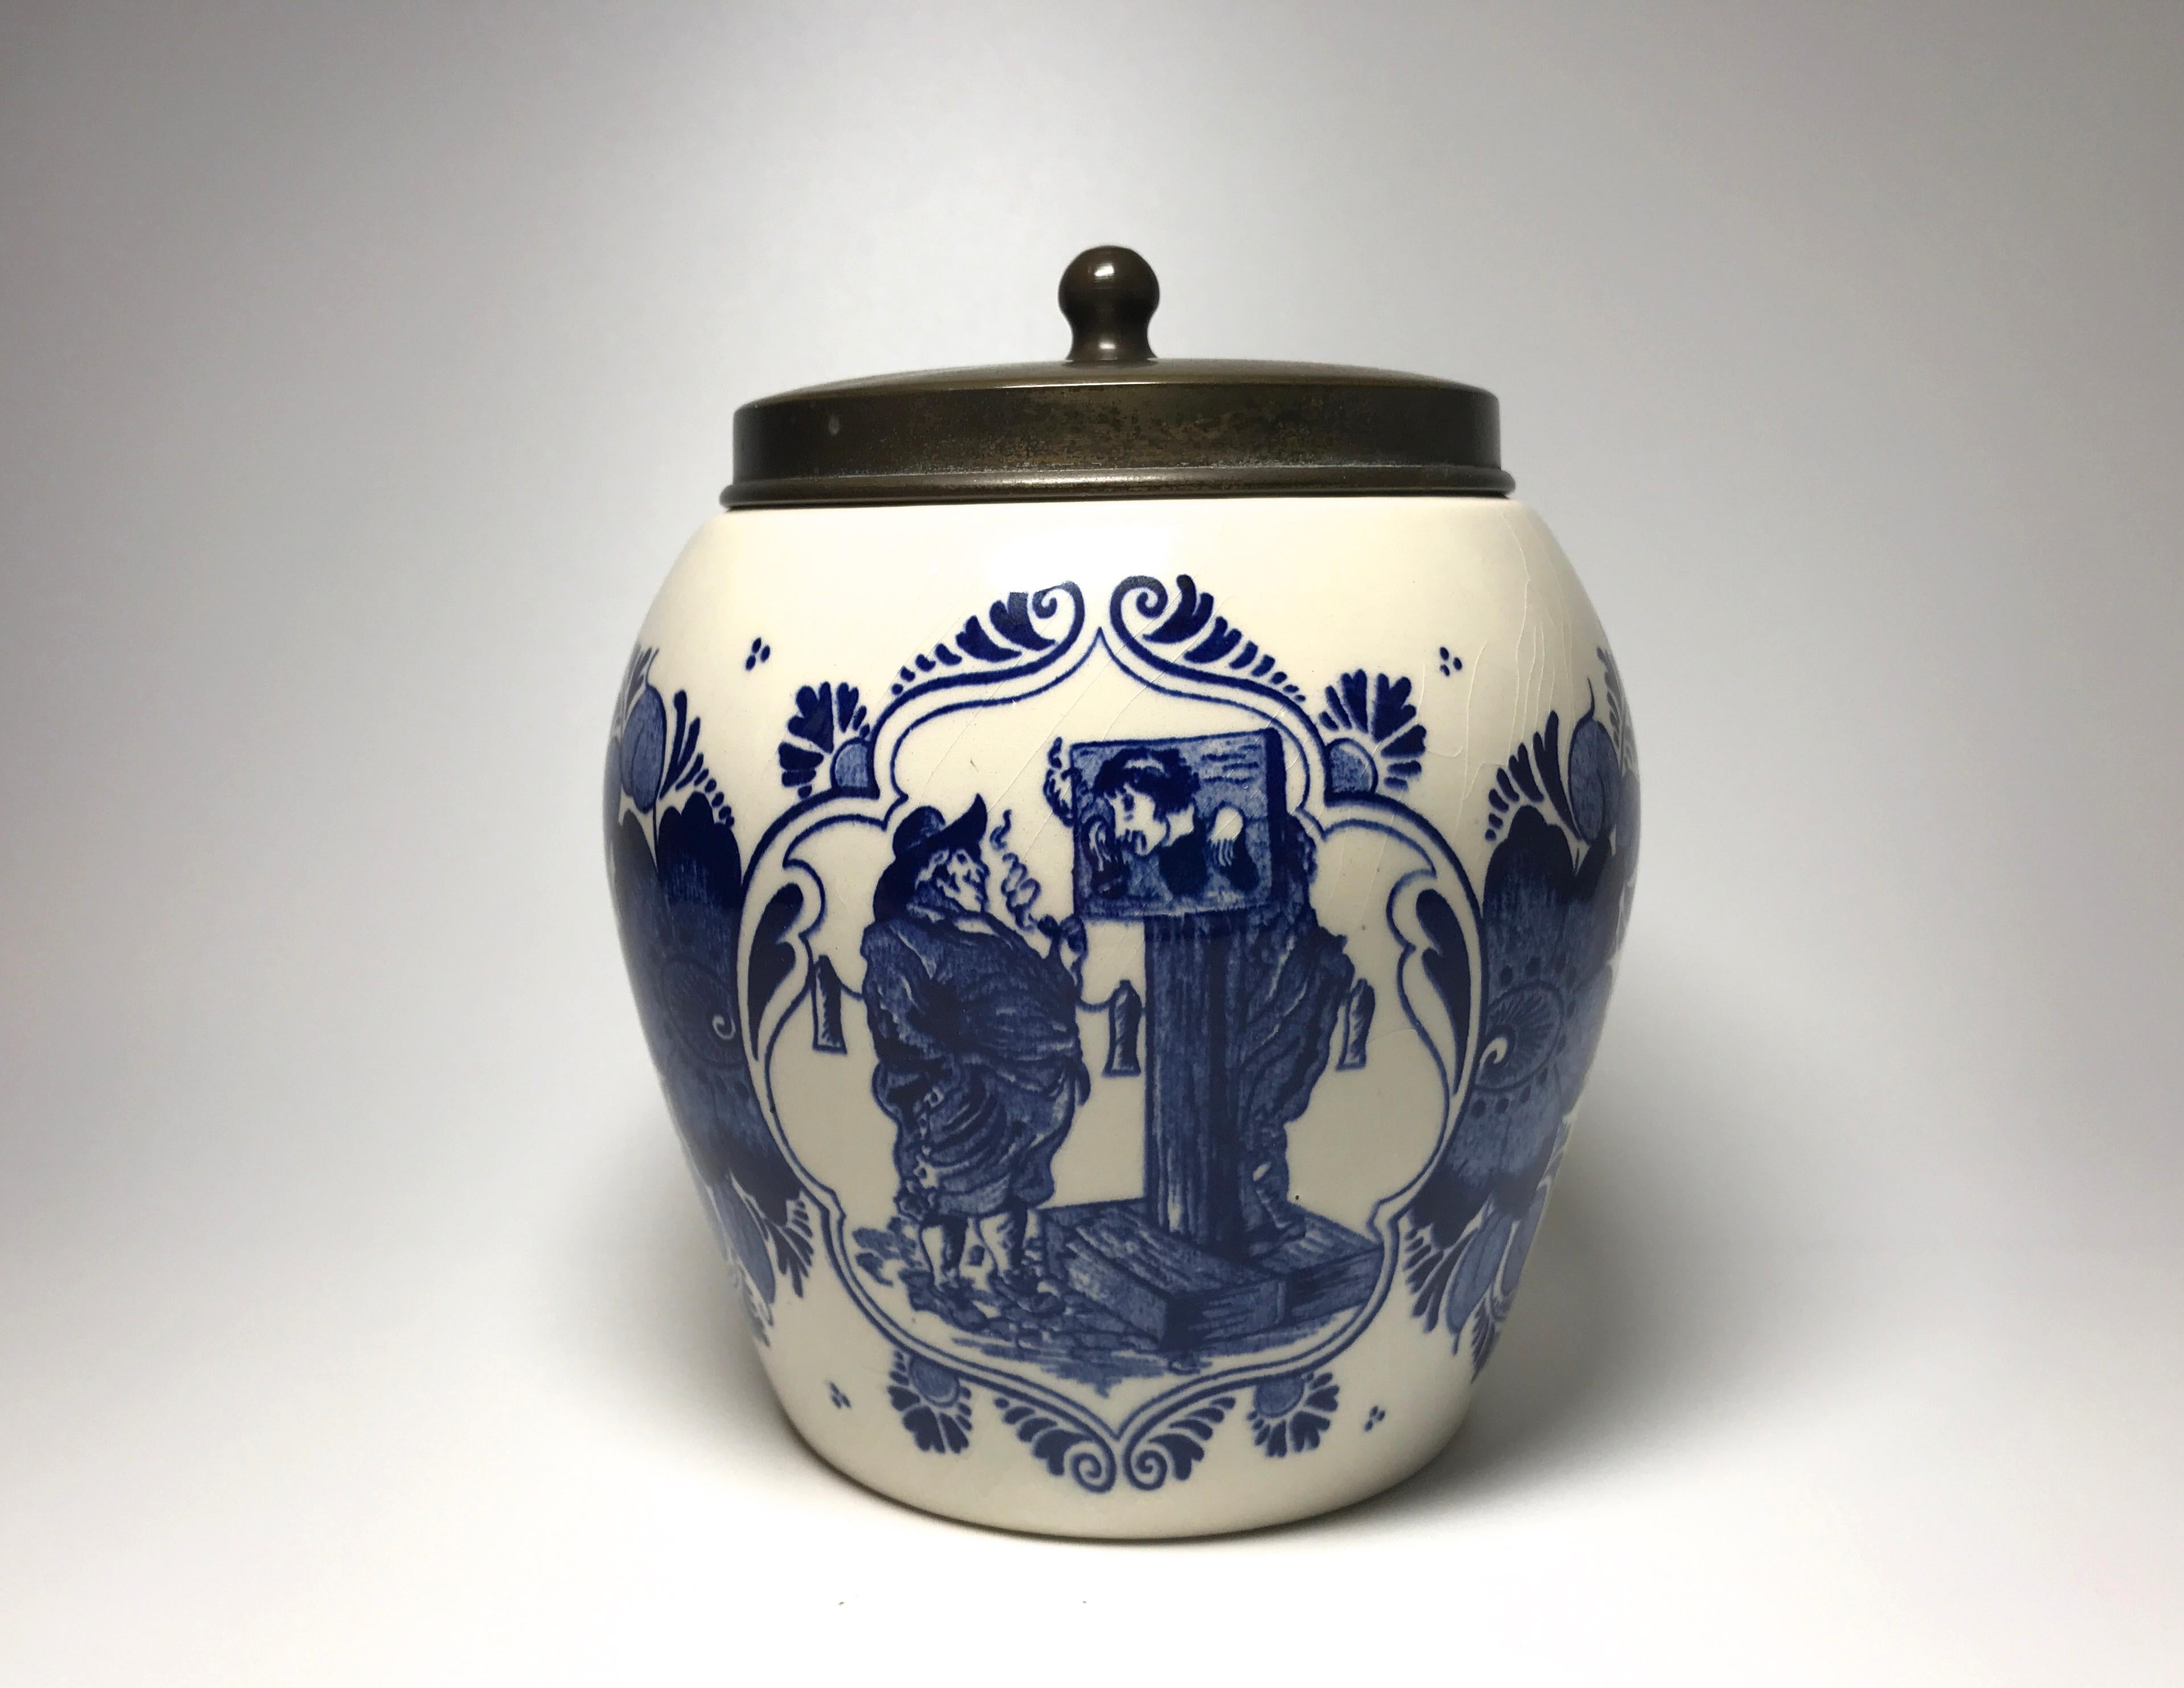 Dutch Delft comical ceramic hand painted humidor tobacco jar with brass lid
Decorated with portly gentleman and a less fortunate man in the stocks. On the reverse is the inscription, 'van Rossem's Toeback, Anno 1750'
This was purchased in The